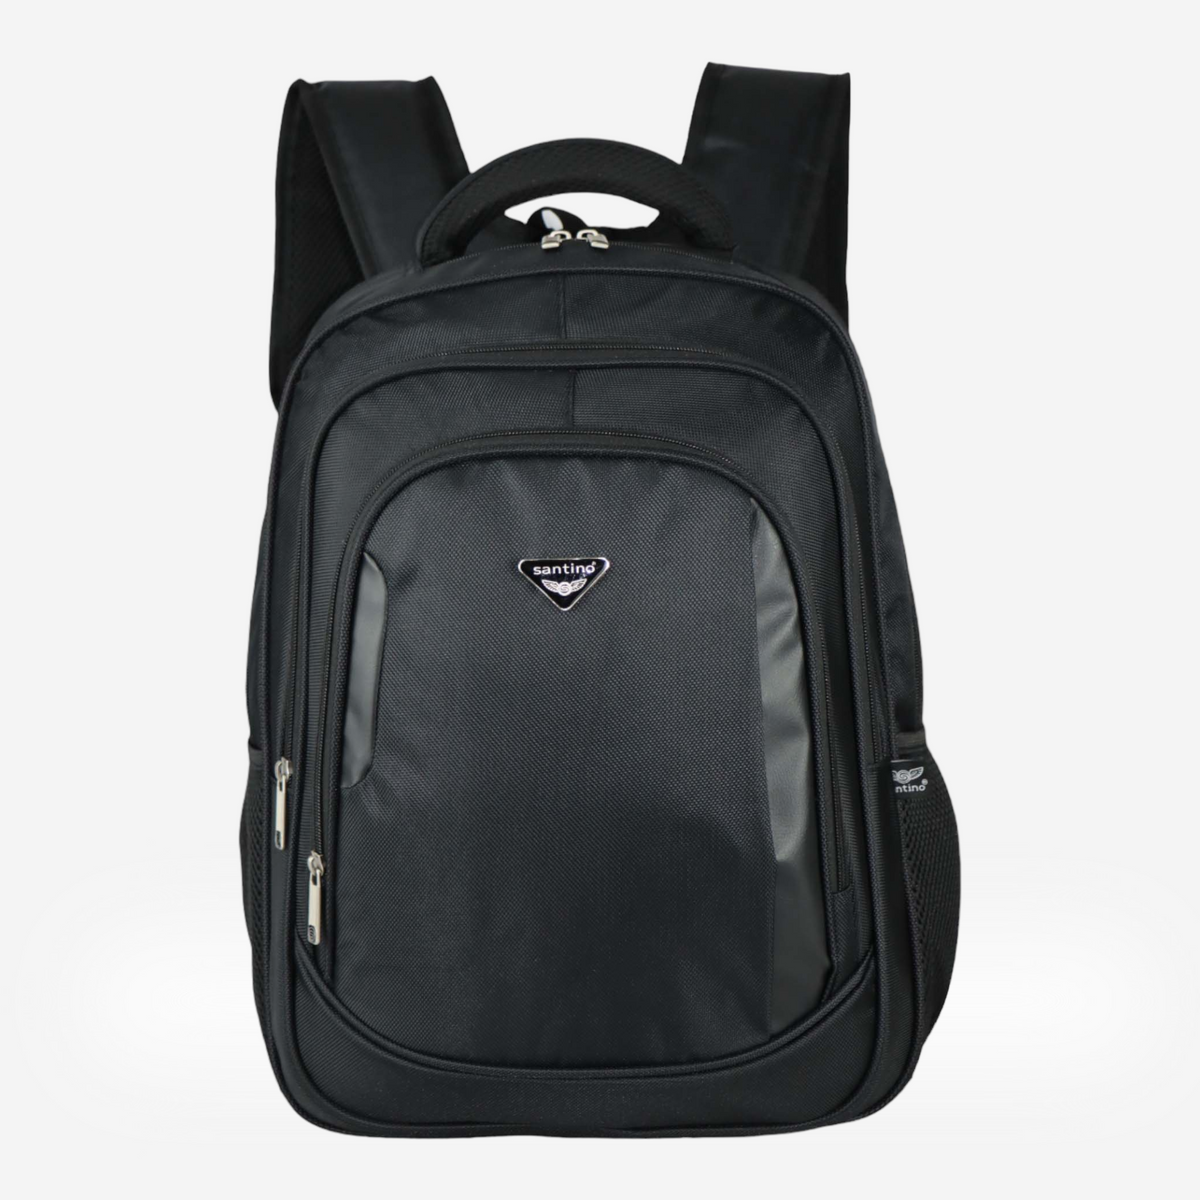 The Santino Colin Notebook Backpack: A Durable and Versatile Travel Co ...